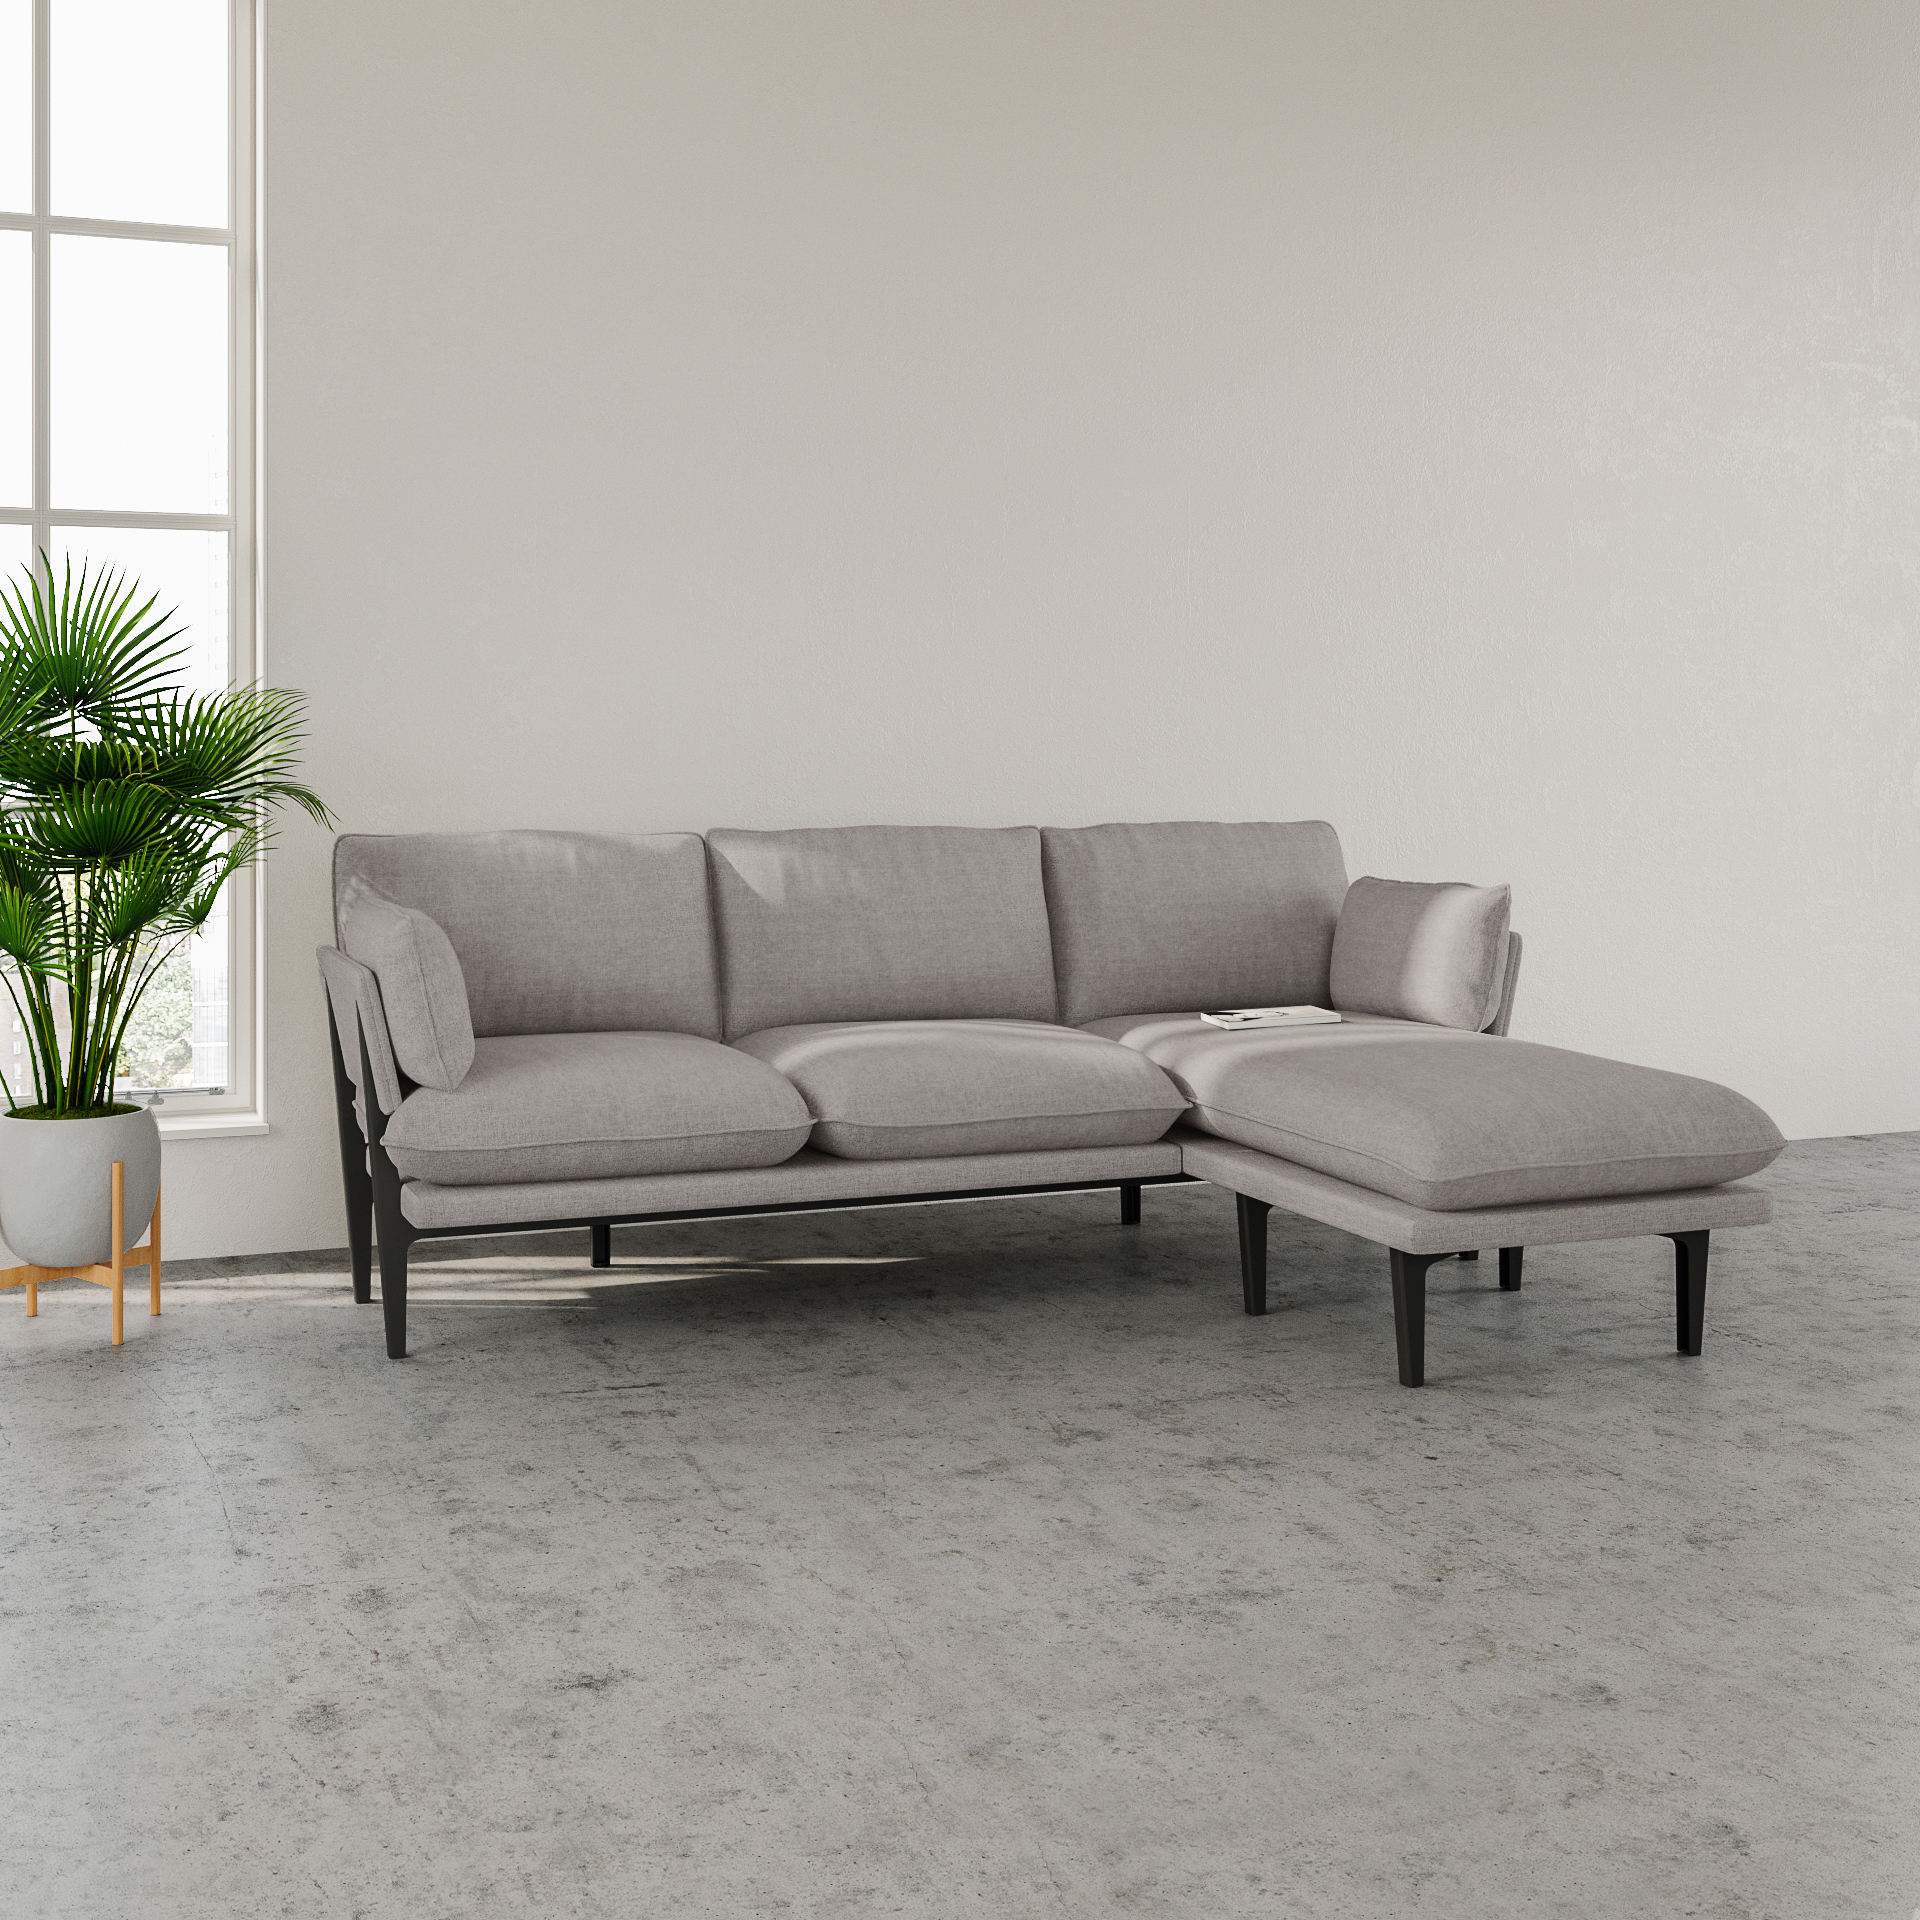 The Floyd Sofa, 3 Seater with chaise, Grey, Wood Frame | Modern Sofas